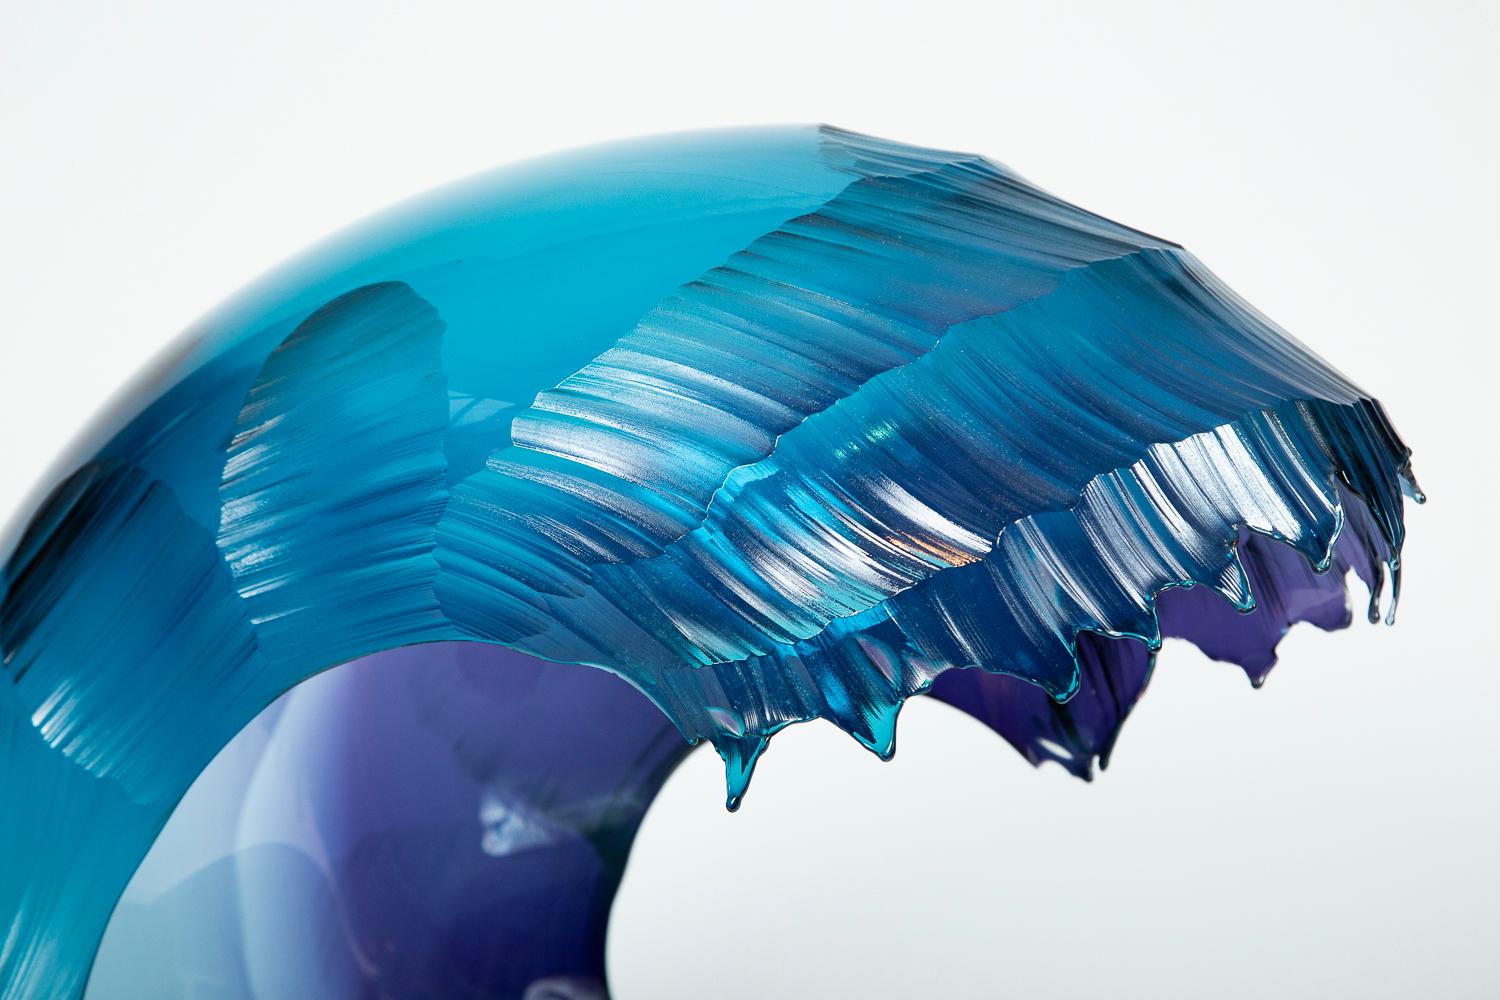 Free blown and sculpted glass by the British artist Graham Muir. In his own words: 'I find glass to be a material that does not respond well to being dominated by the artist. For me the concept of the work is just the starting point for a